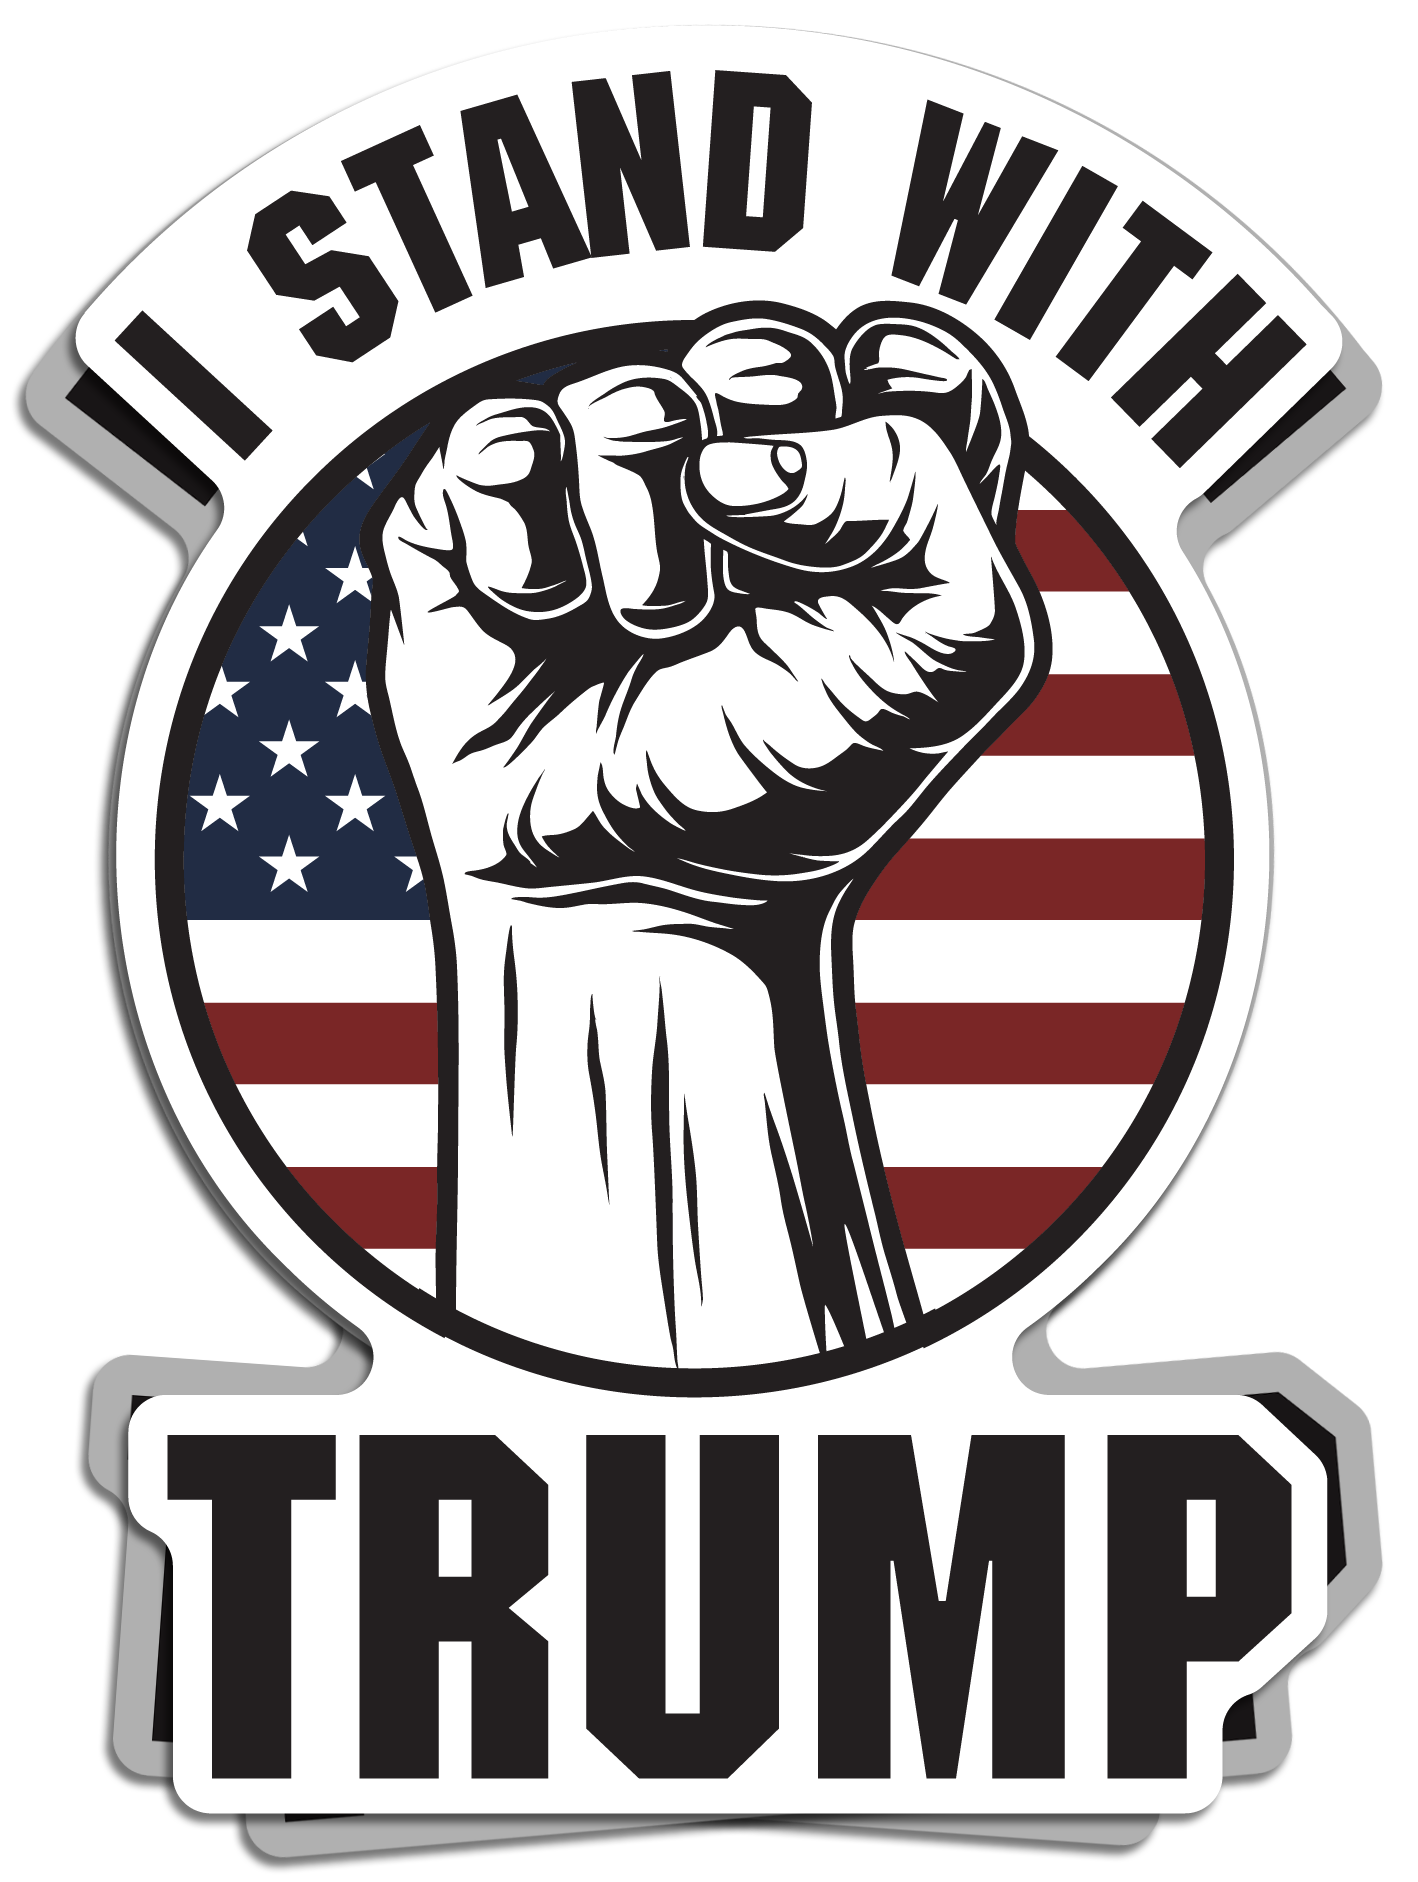 I Stand With Trump Decal